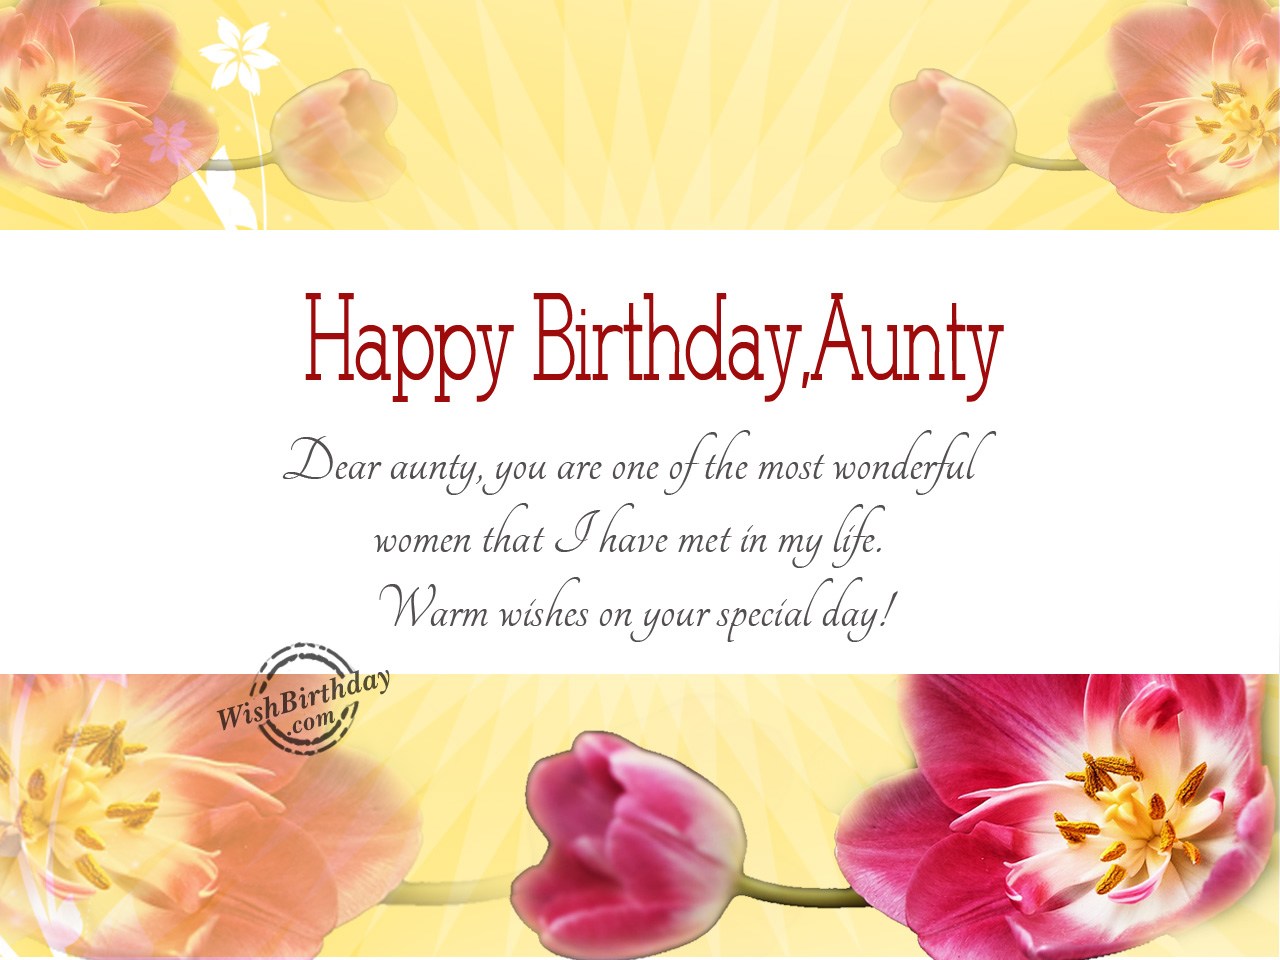 Dear aunty you are one of the most - Birthday Wishes, Happy ...